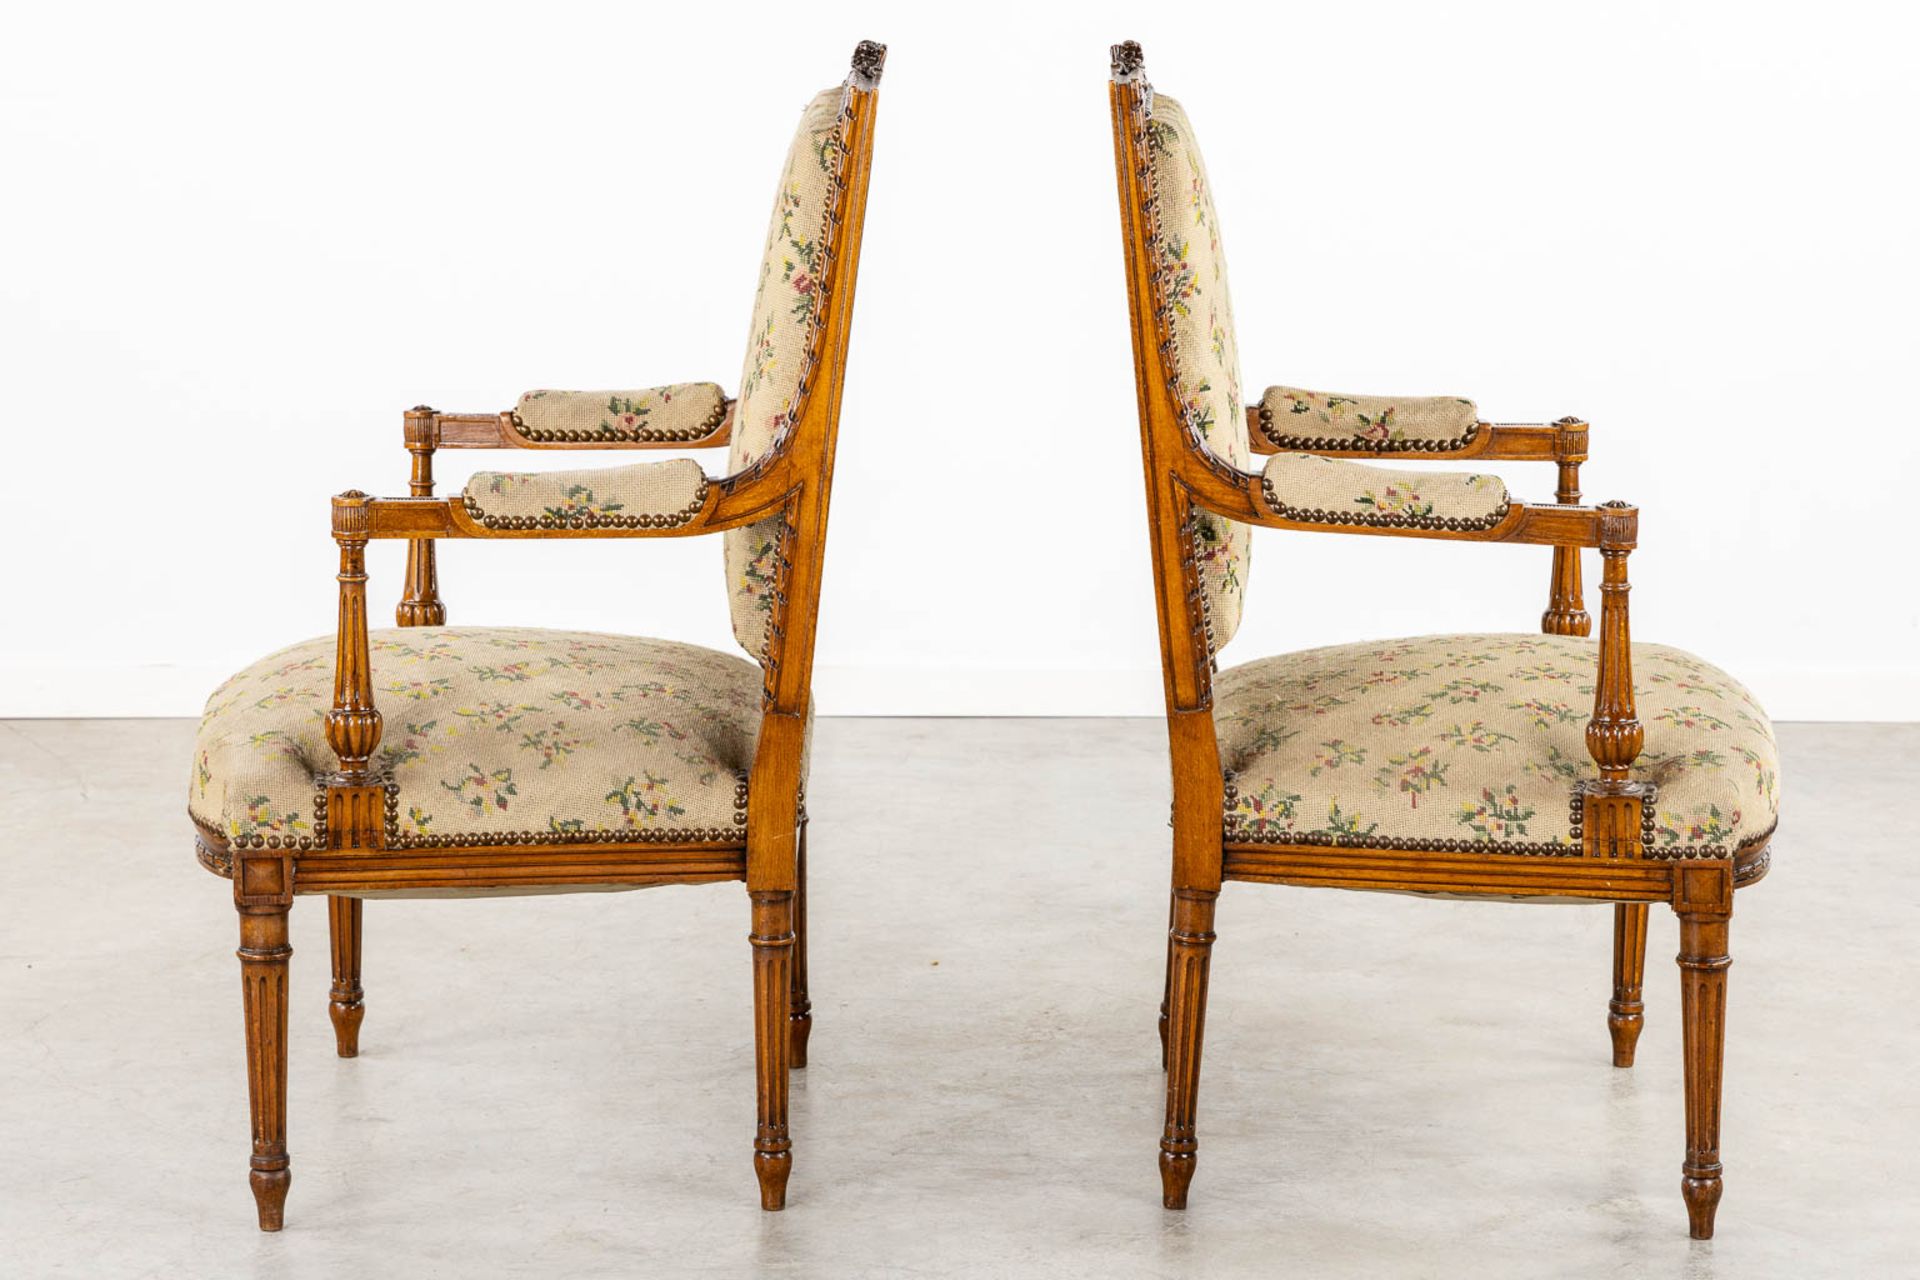 A pair of wood-sculptured armchairs with emboidered upholstry. Louis XVI style. (L:62 x W:64 x H:100 - Image 4 of 11